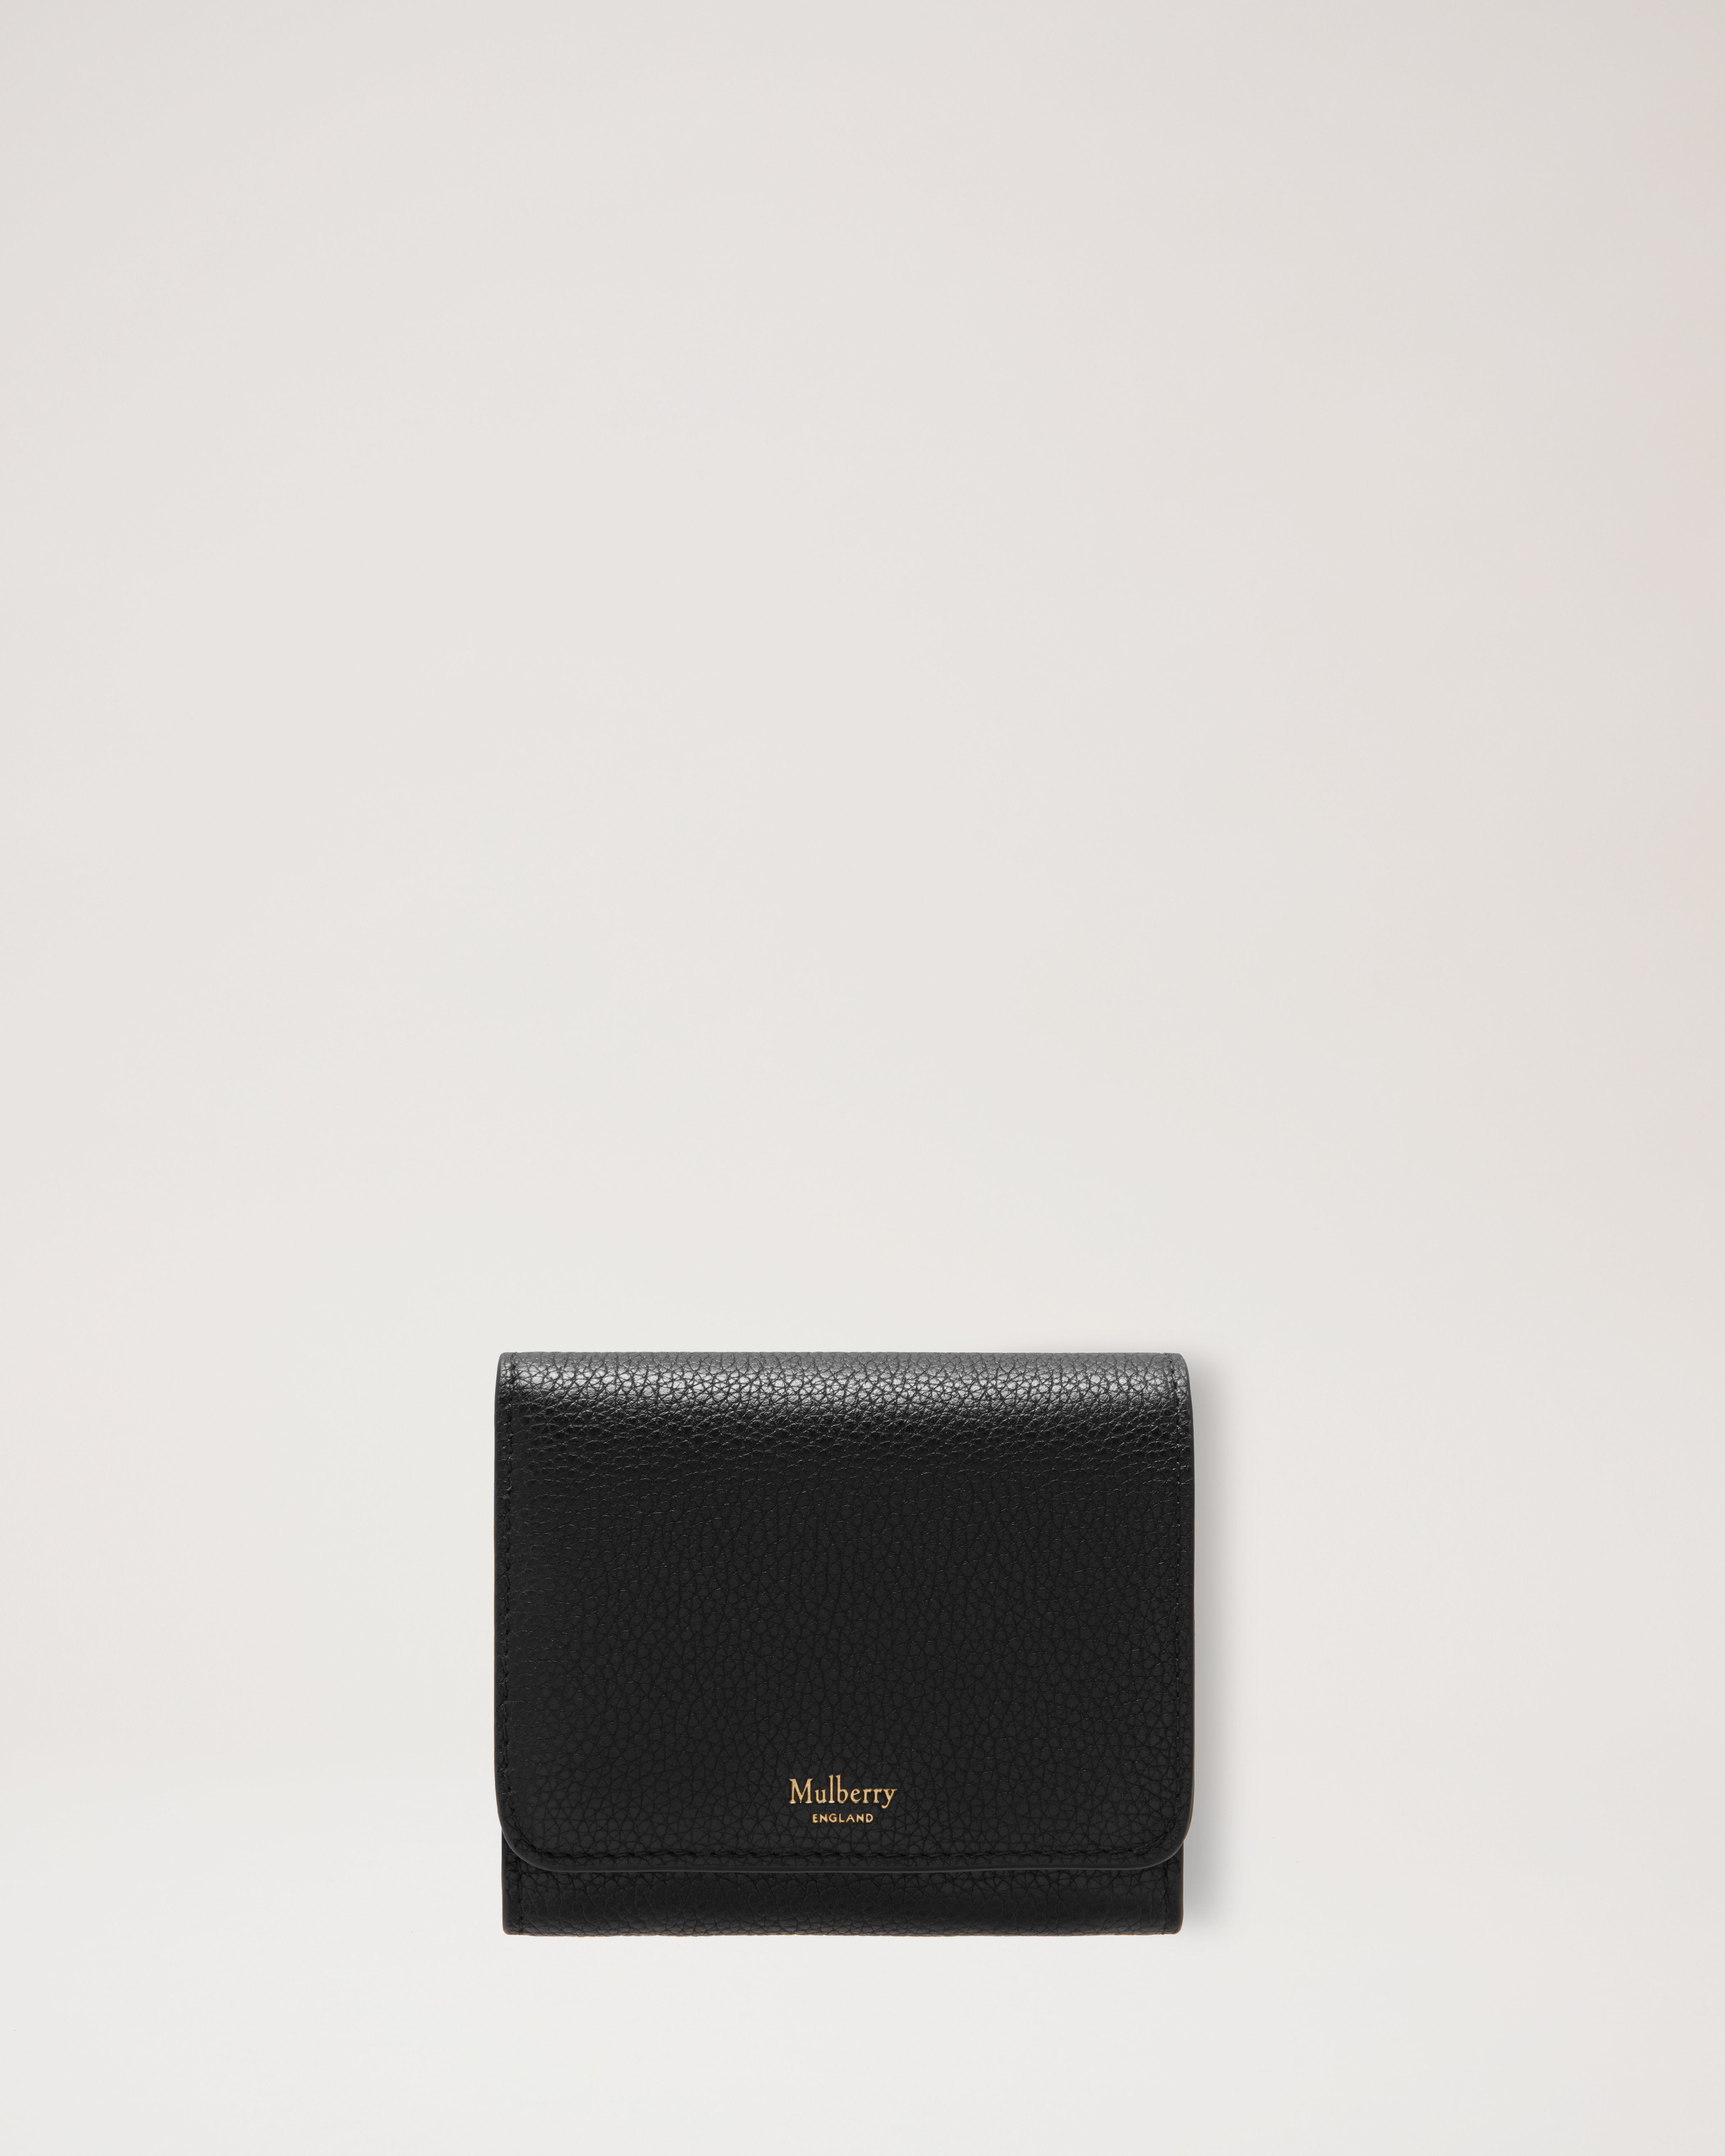 Search Purses | Mulberry